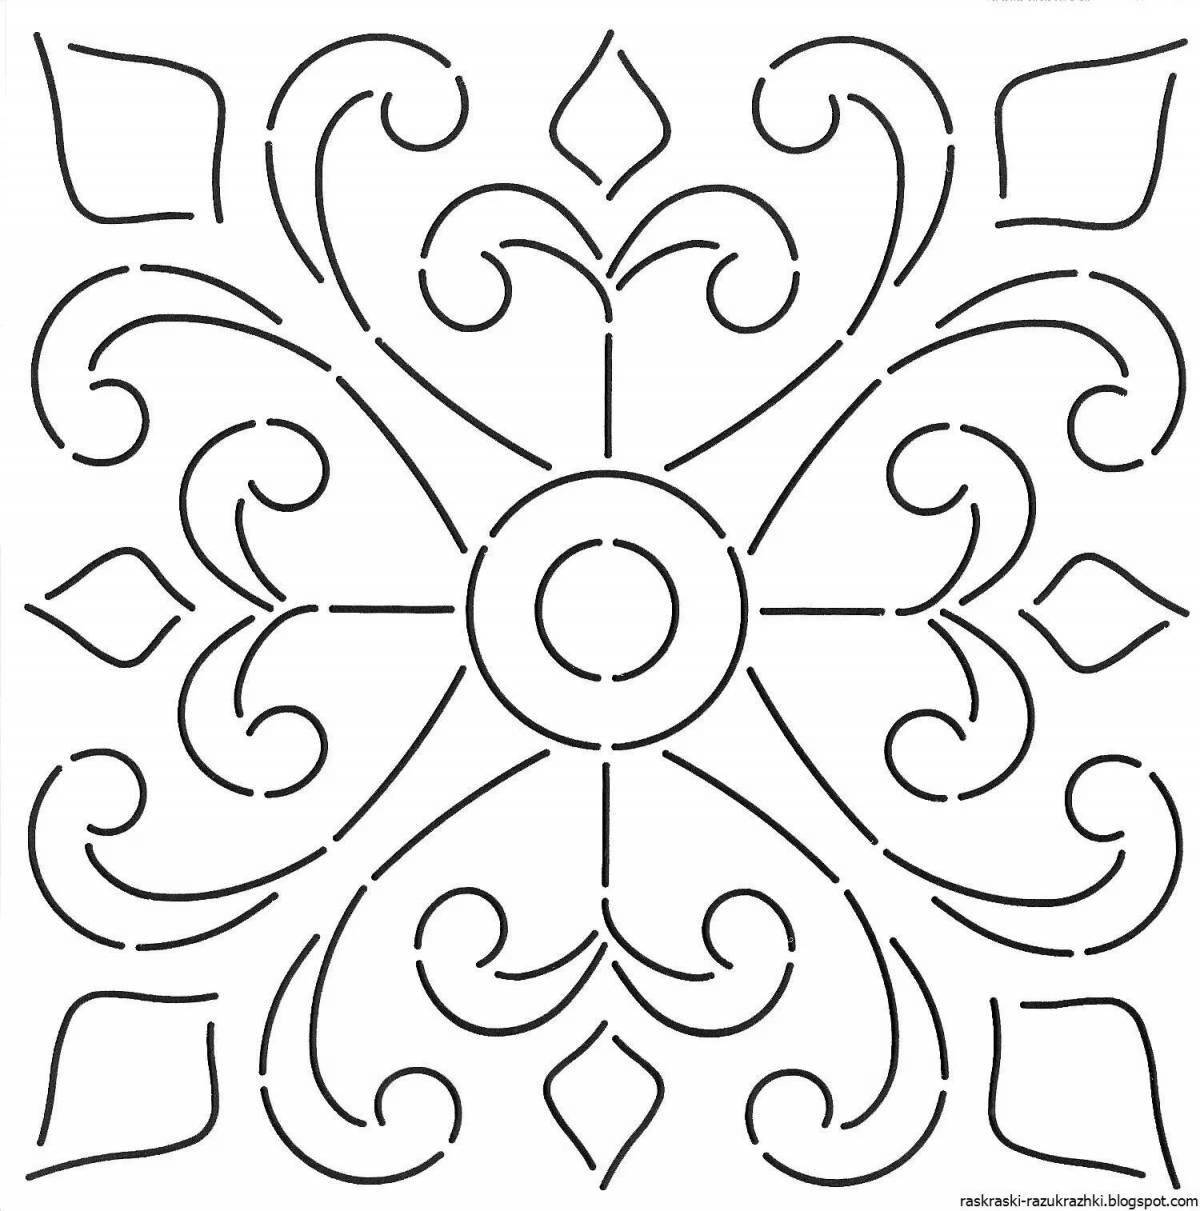 Amazing ceramic tile coloring page